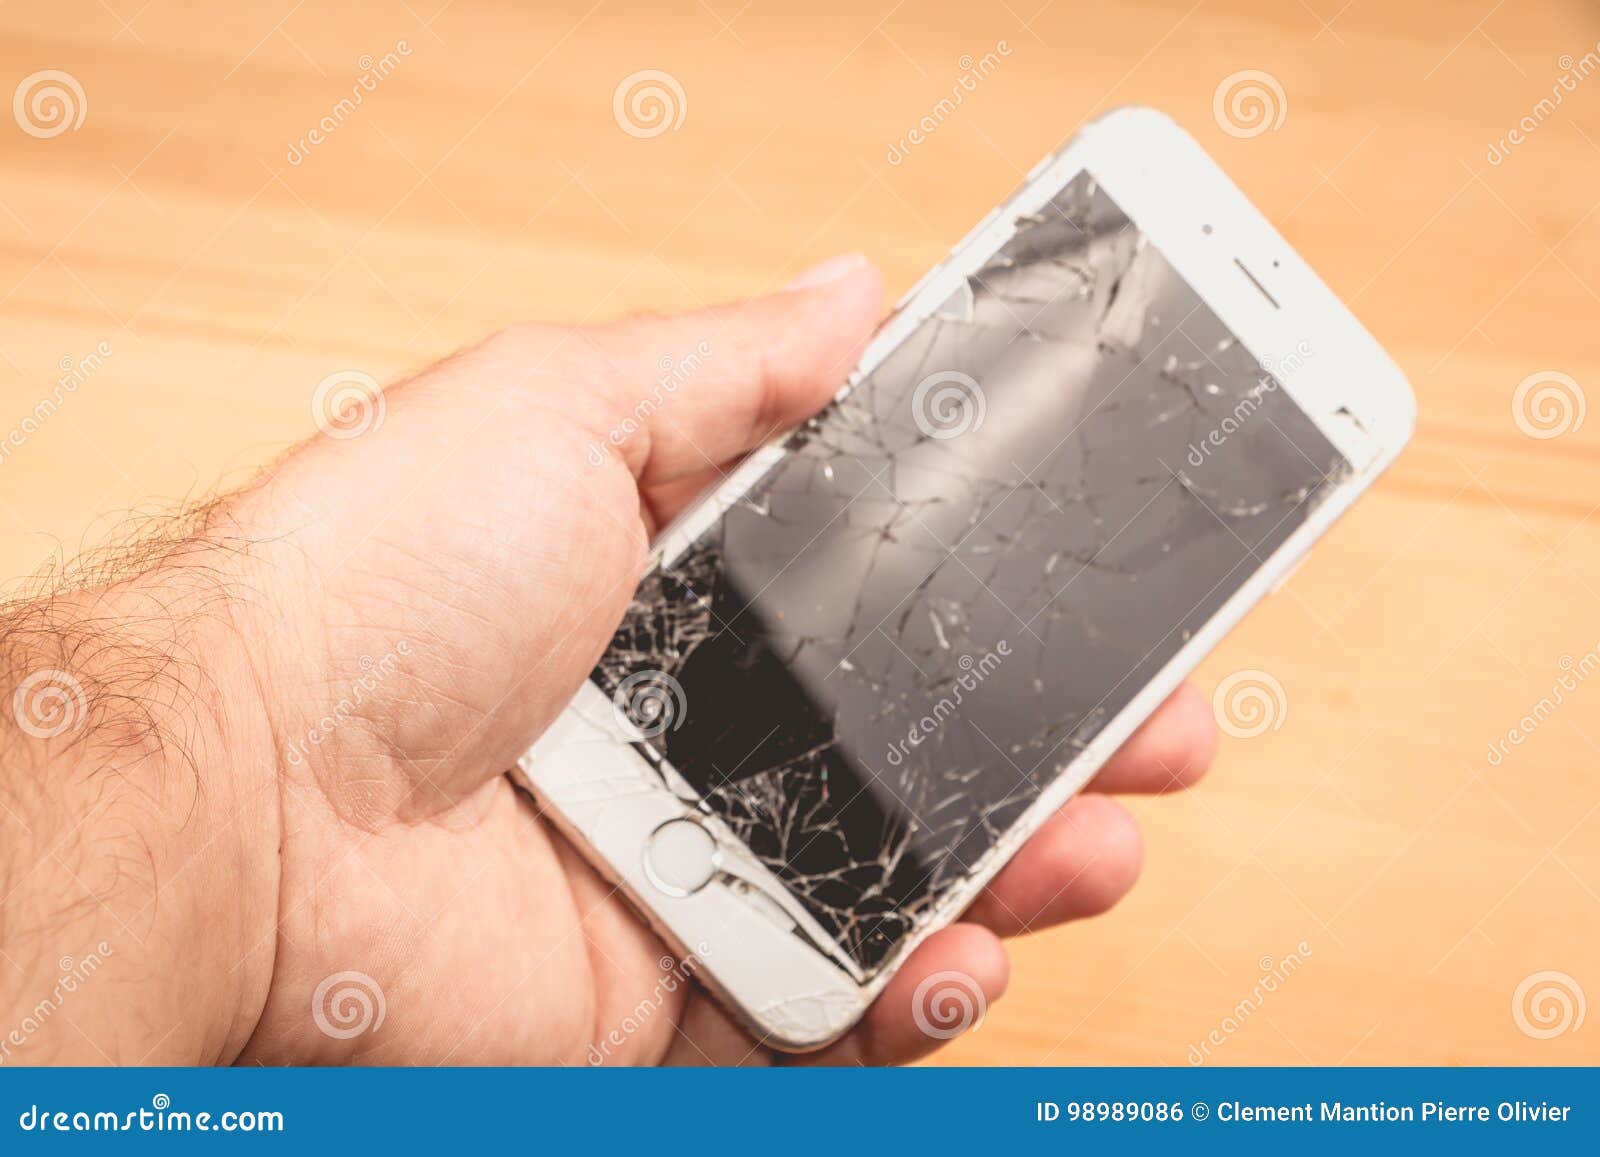 A Man Holds in His Hand an Iphone 6S of Apple Inc Editorial Photo - Image of economy, break ...